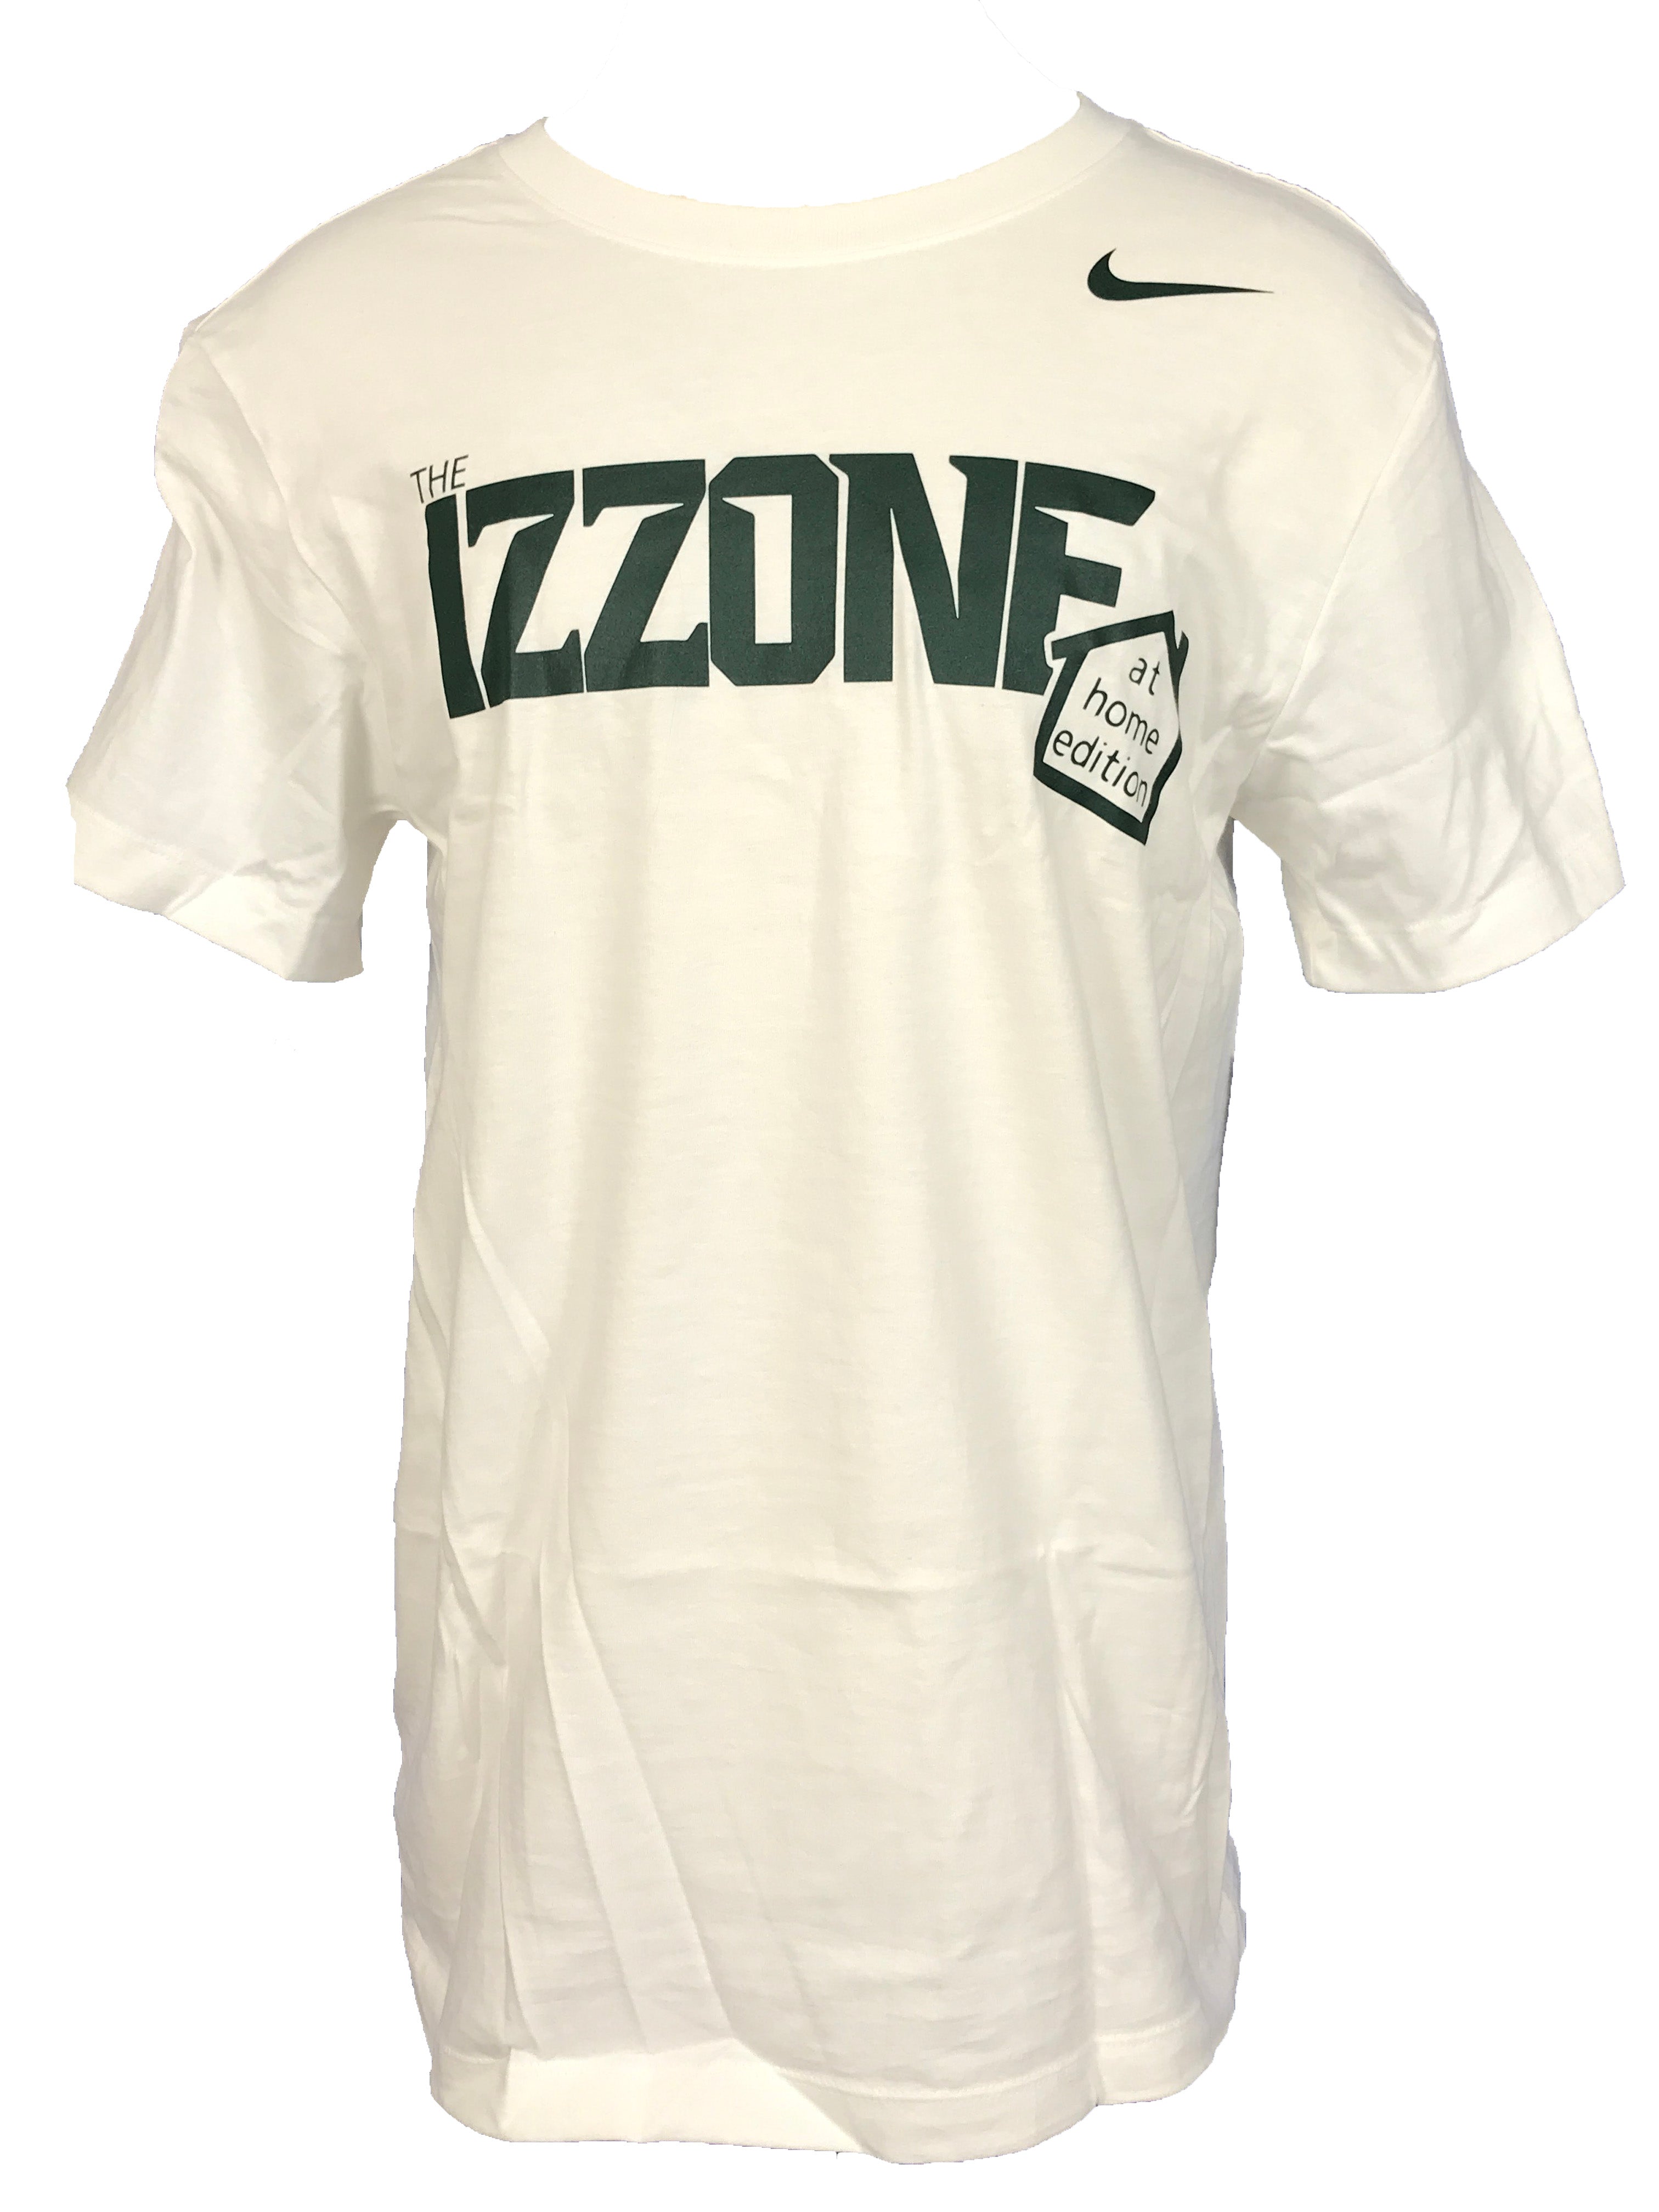 Nike White 2020 The Izzone At Home Edition MSU Basketball T-Shirt Men's Size L